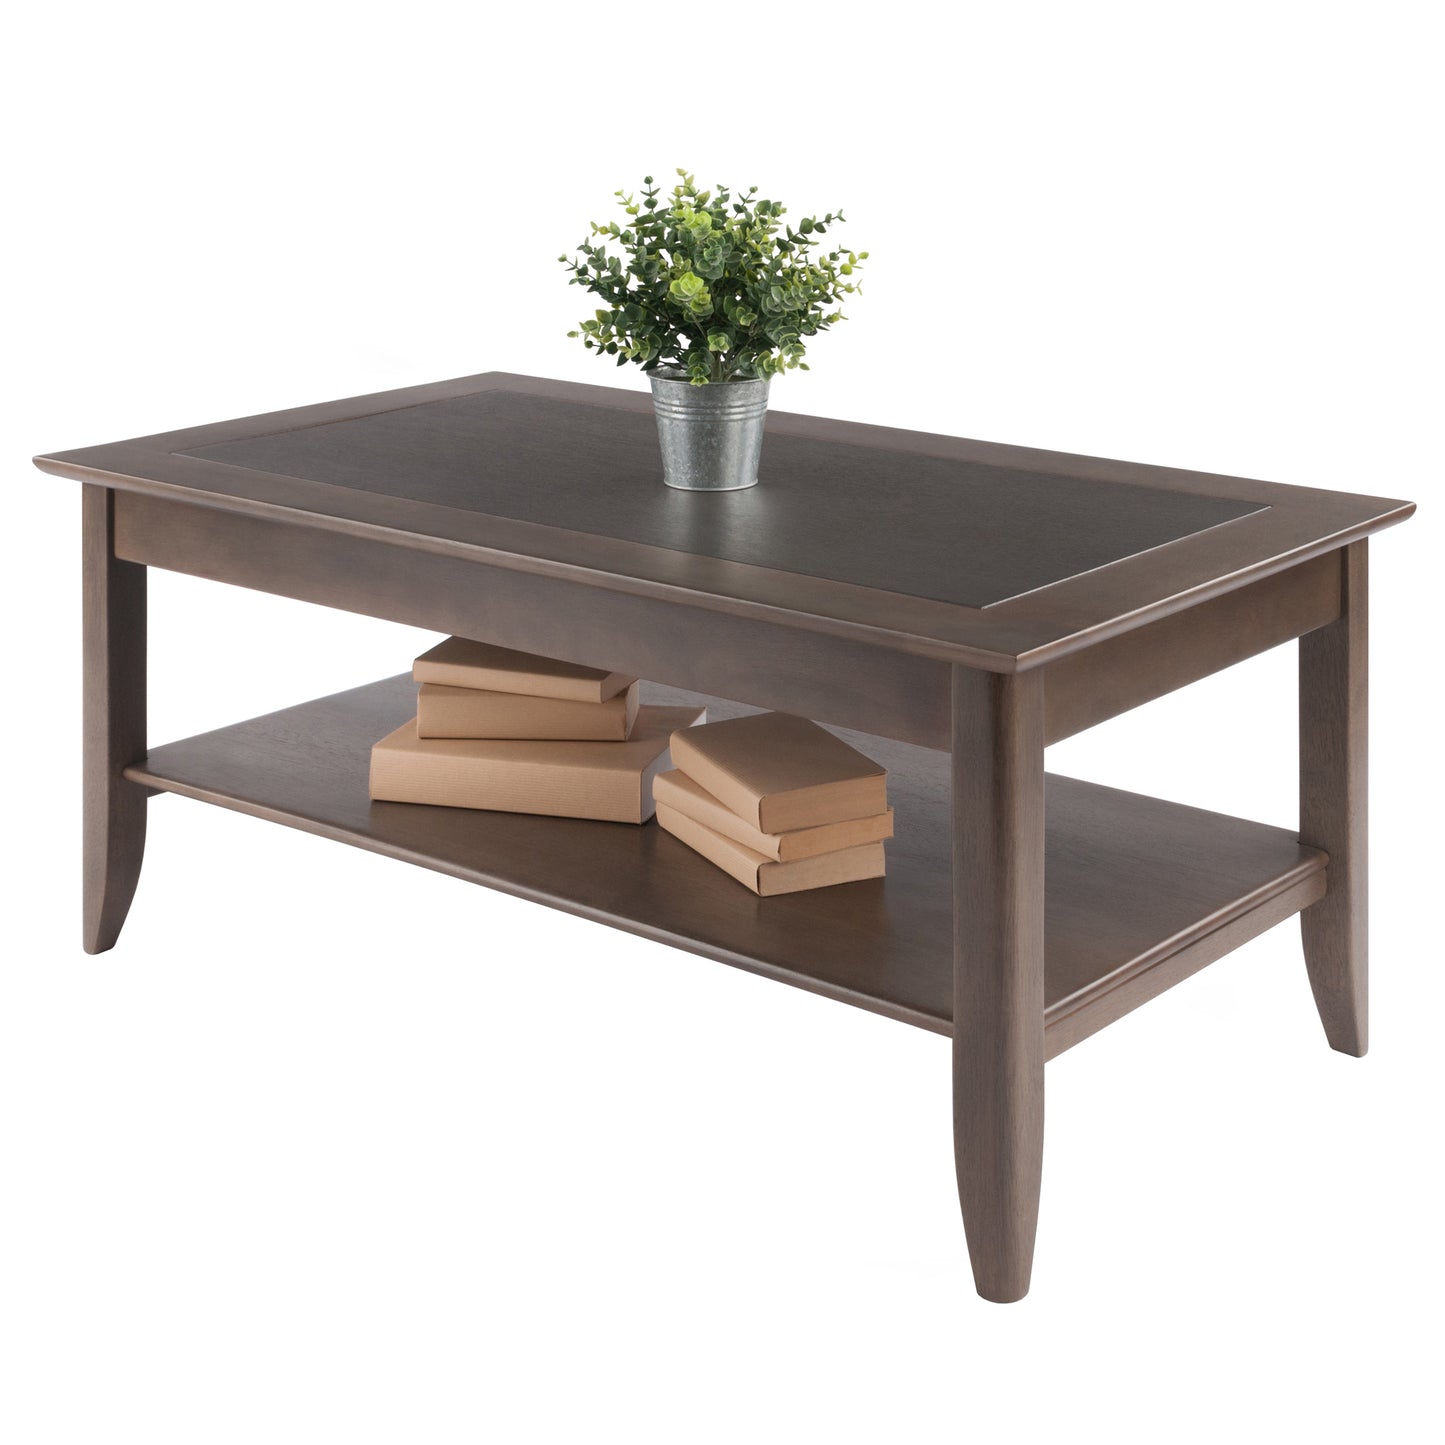 Santino Coffee Table, Oyster Gray